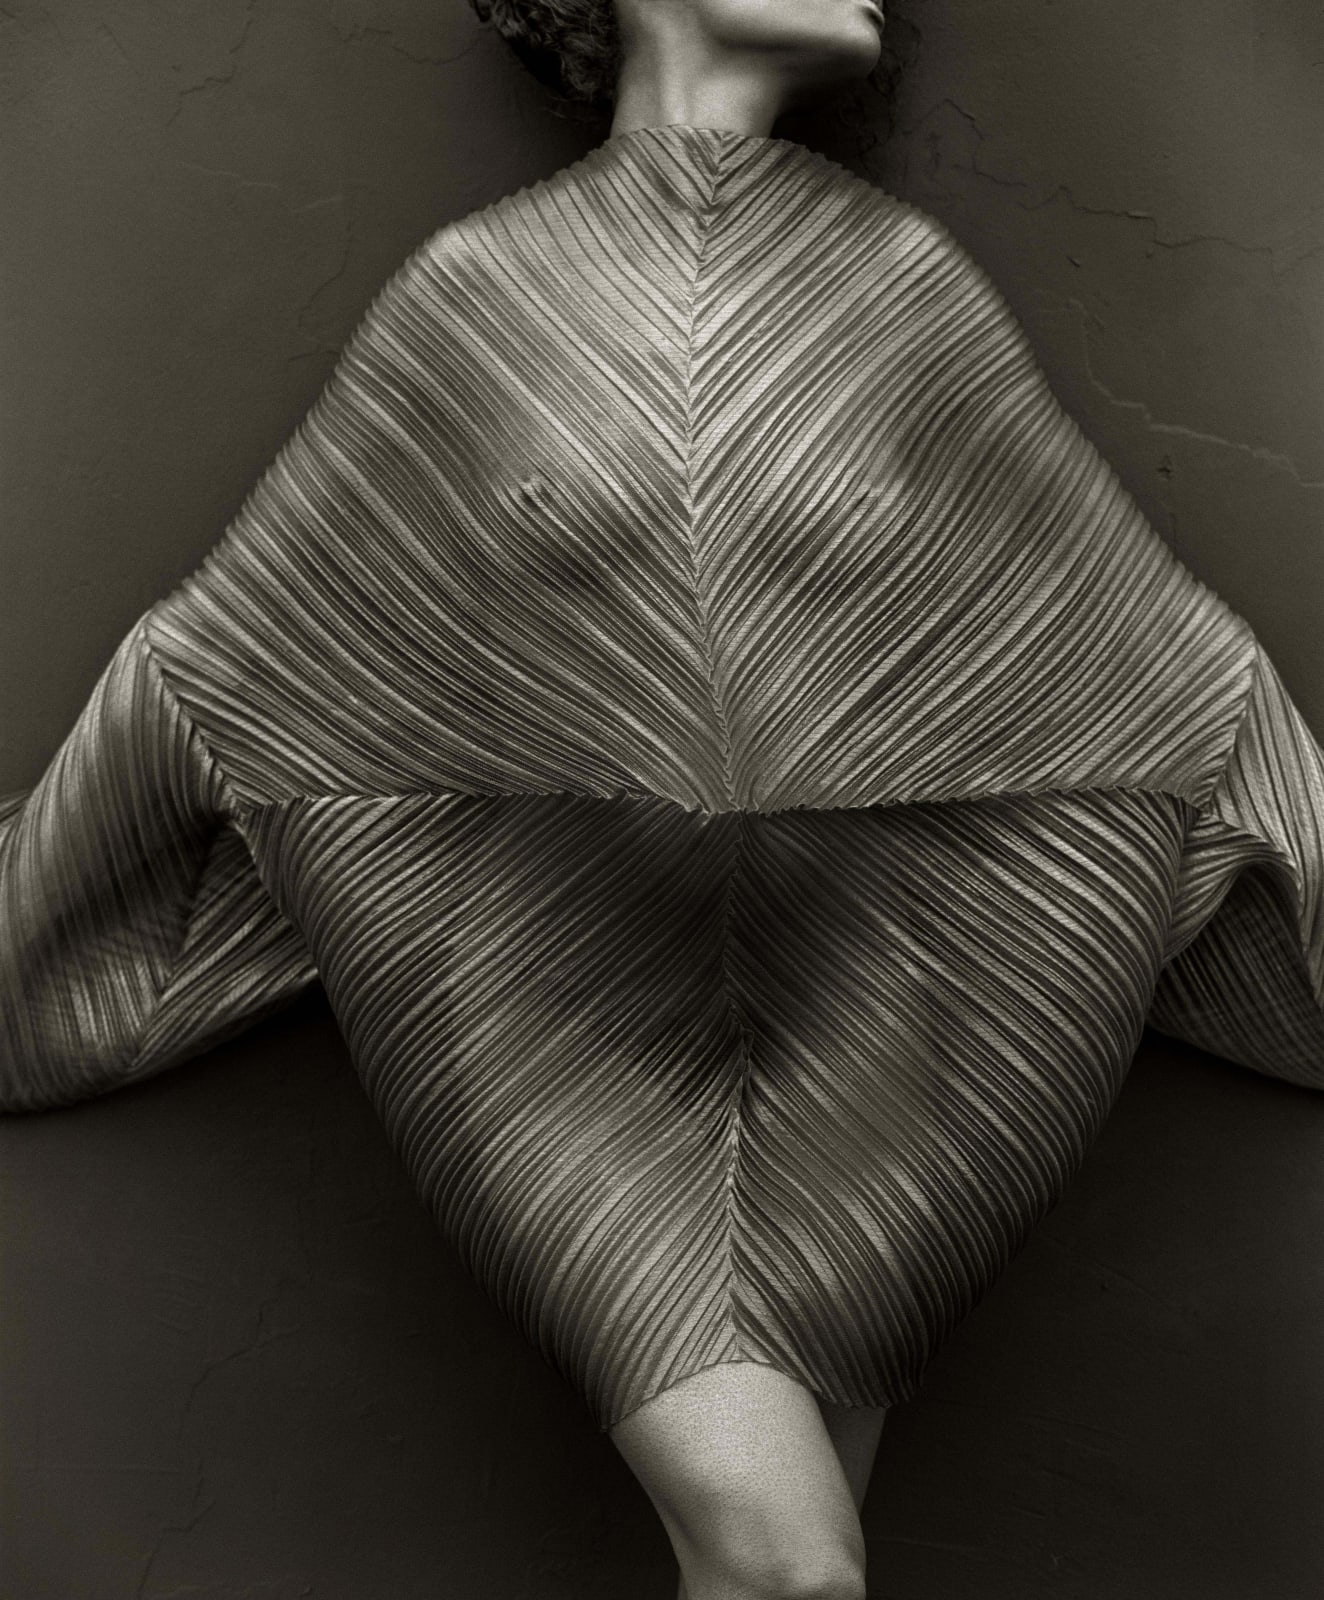 Herb Ritts, Wrapped Torso, Los Angeles, 1989